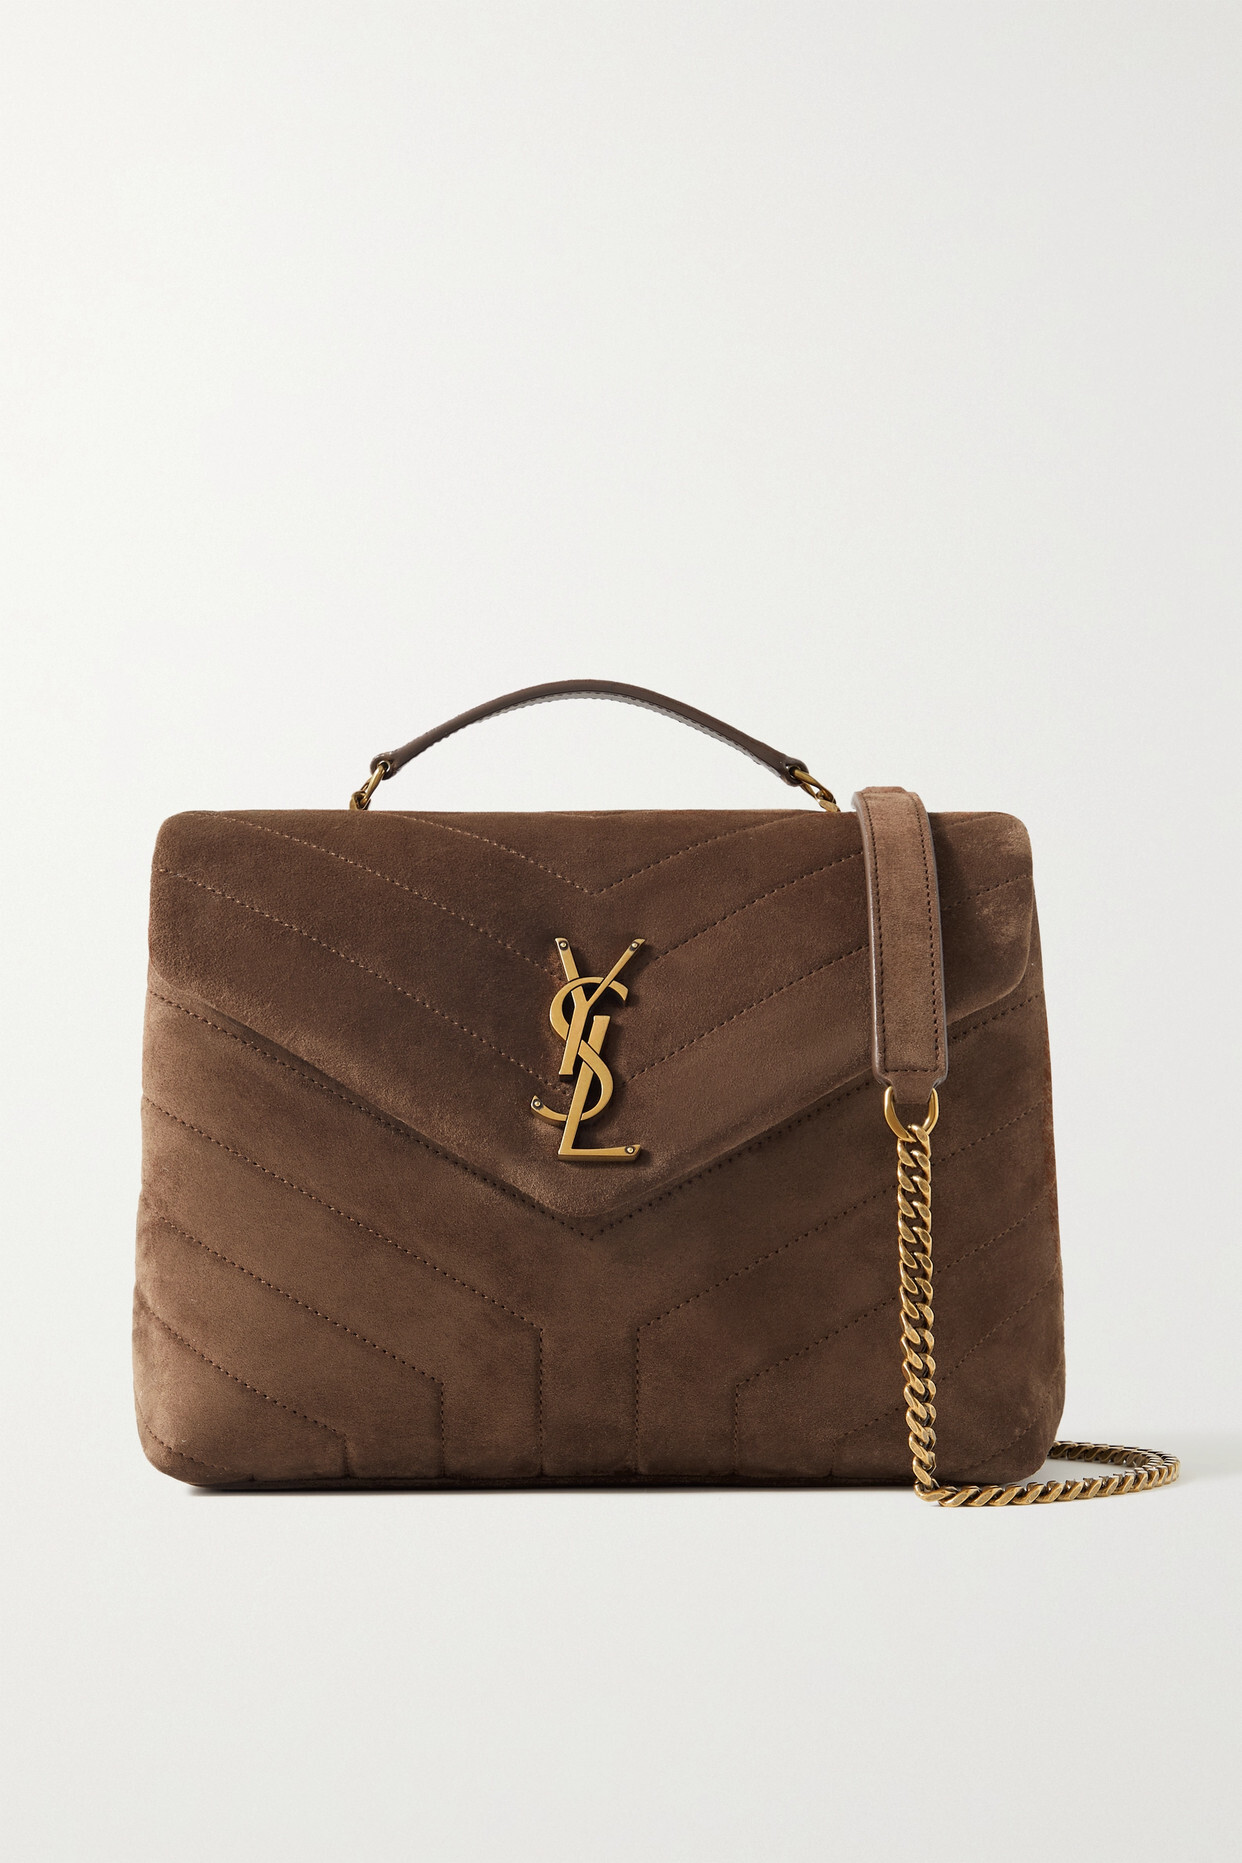 SAINT LAURENT - Loulou Small Quilted Suede Shoulder Bag - Brown